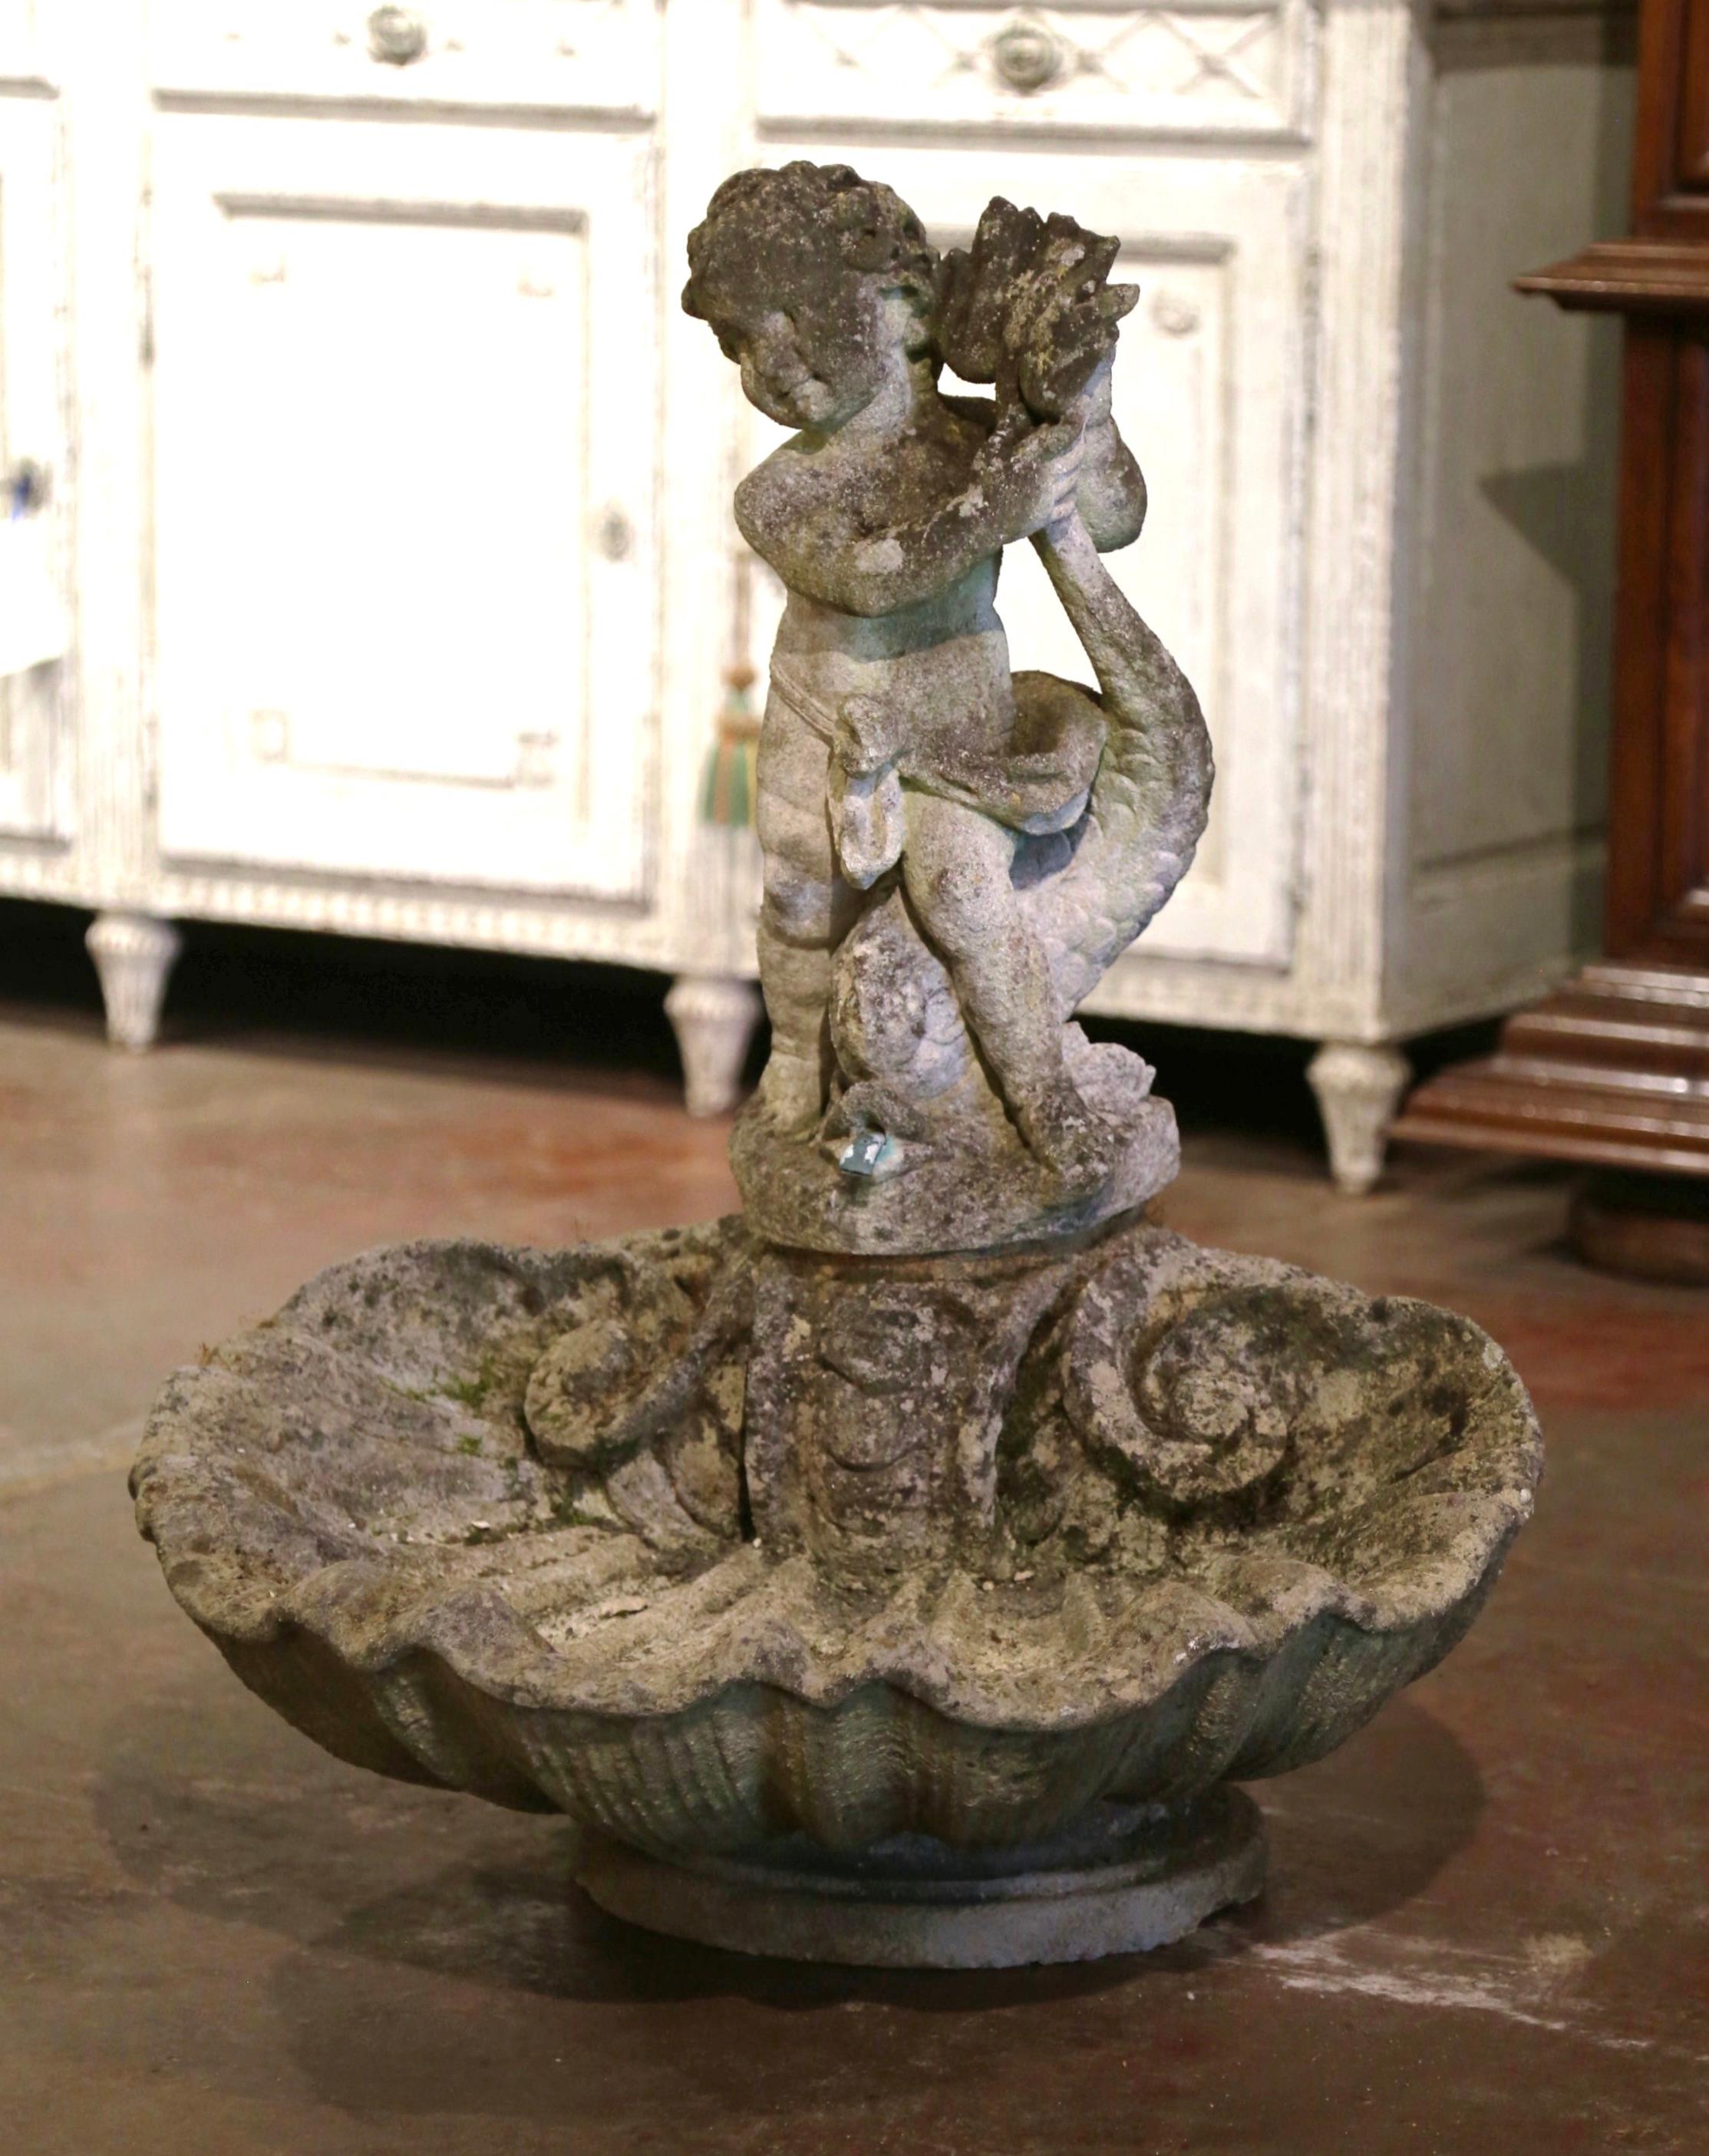 Decorate a garden or backyard with this elegant antique fountain birdbath. Crafted in France circa 1780 and coming from a Loire Valley chateau, the large garden element features a beautiful scalloped shell form basin at the base with a carved cherub